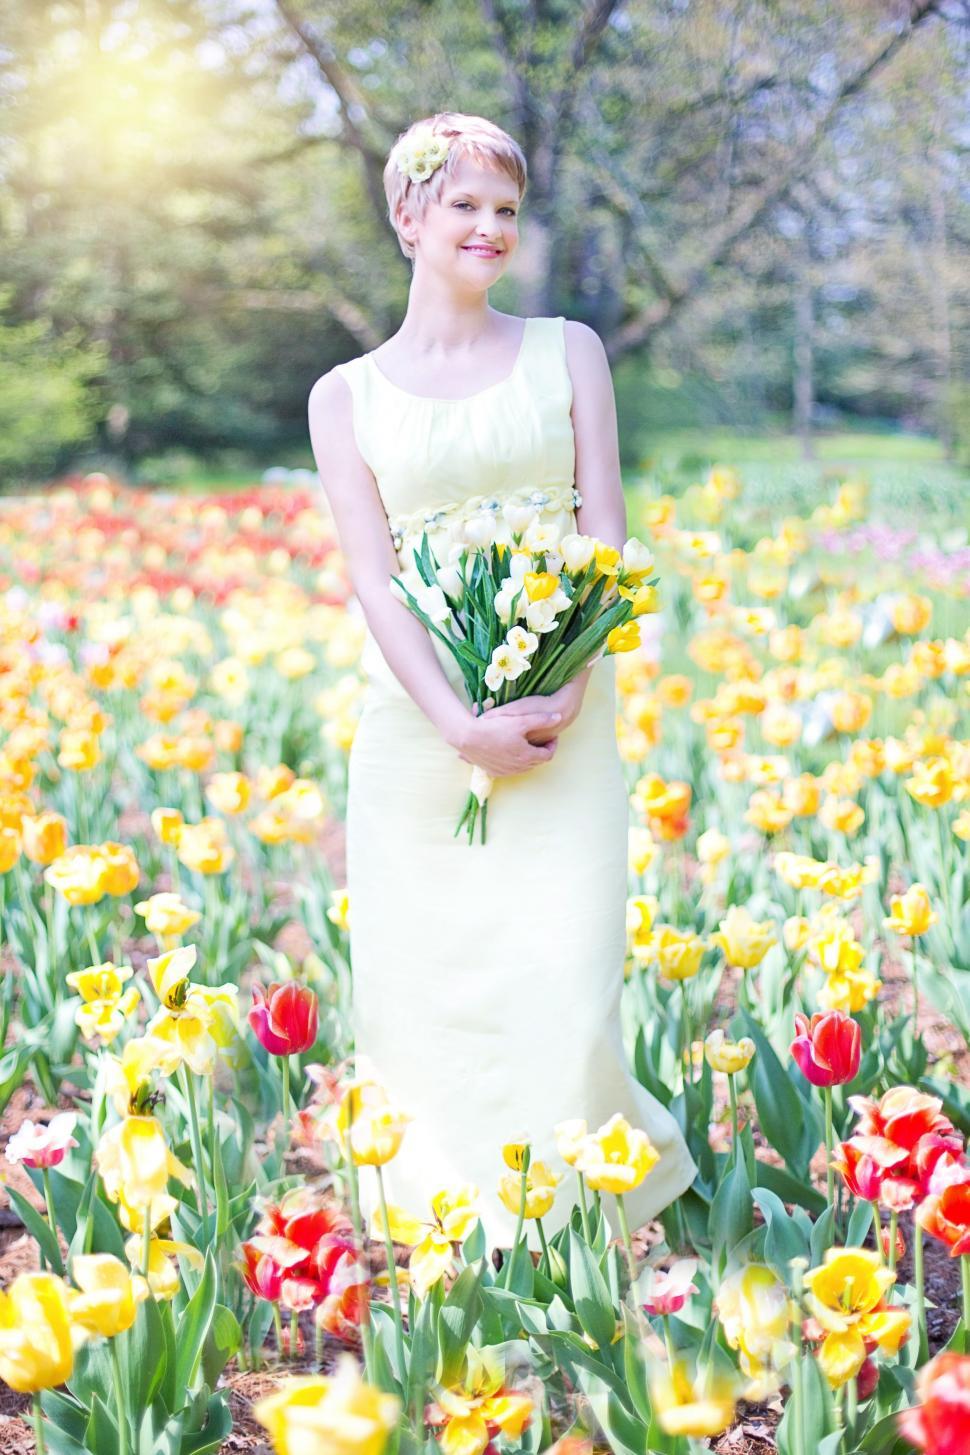 Free Image of Short Hair Woman Standing in Tulip Field - Looking at camera  